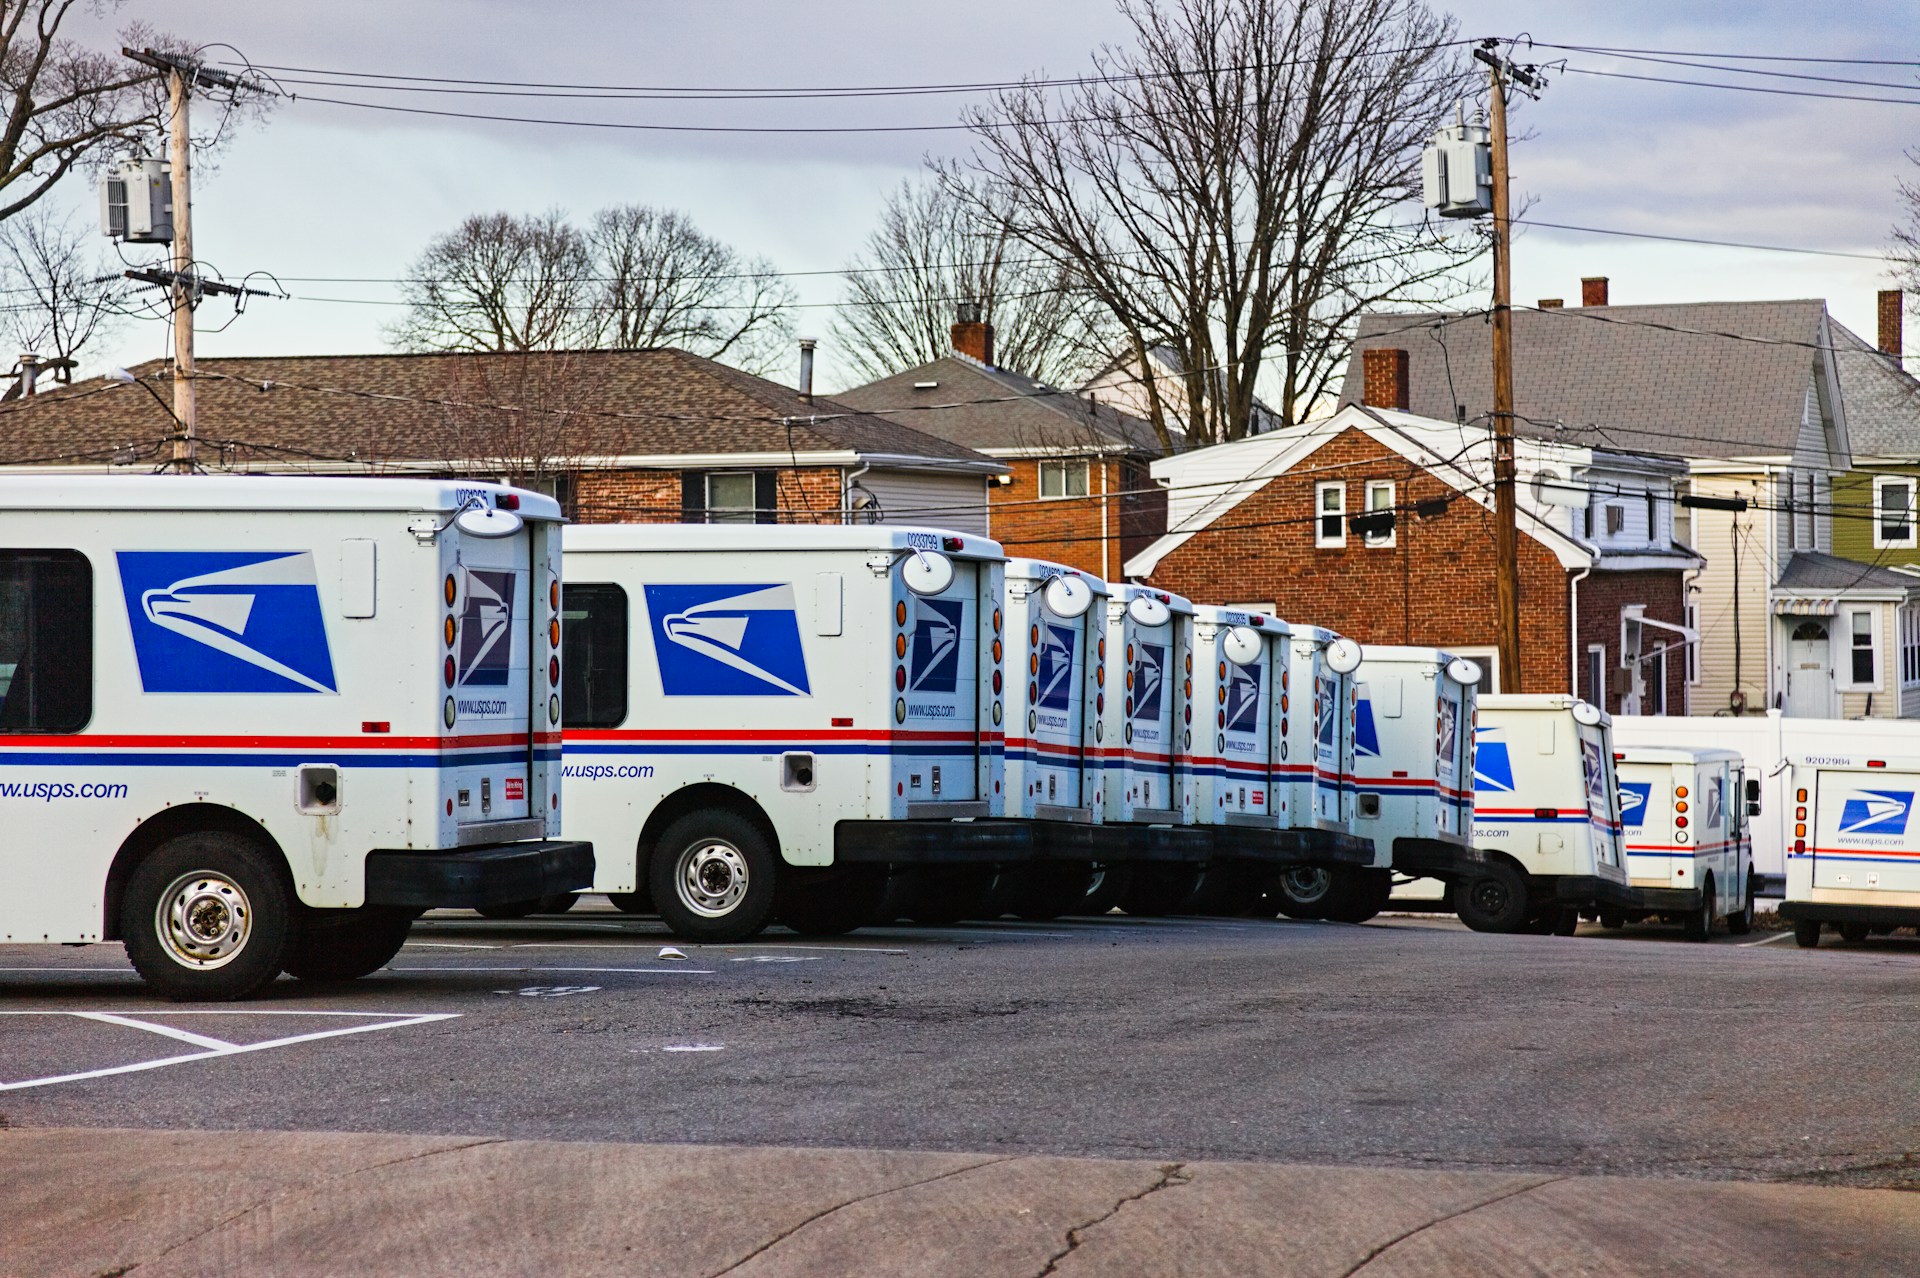 USPS: A Last-Mile Delivery Powerhouse